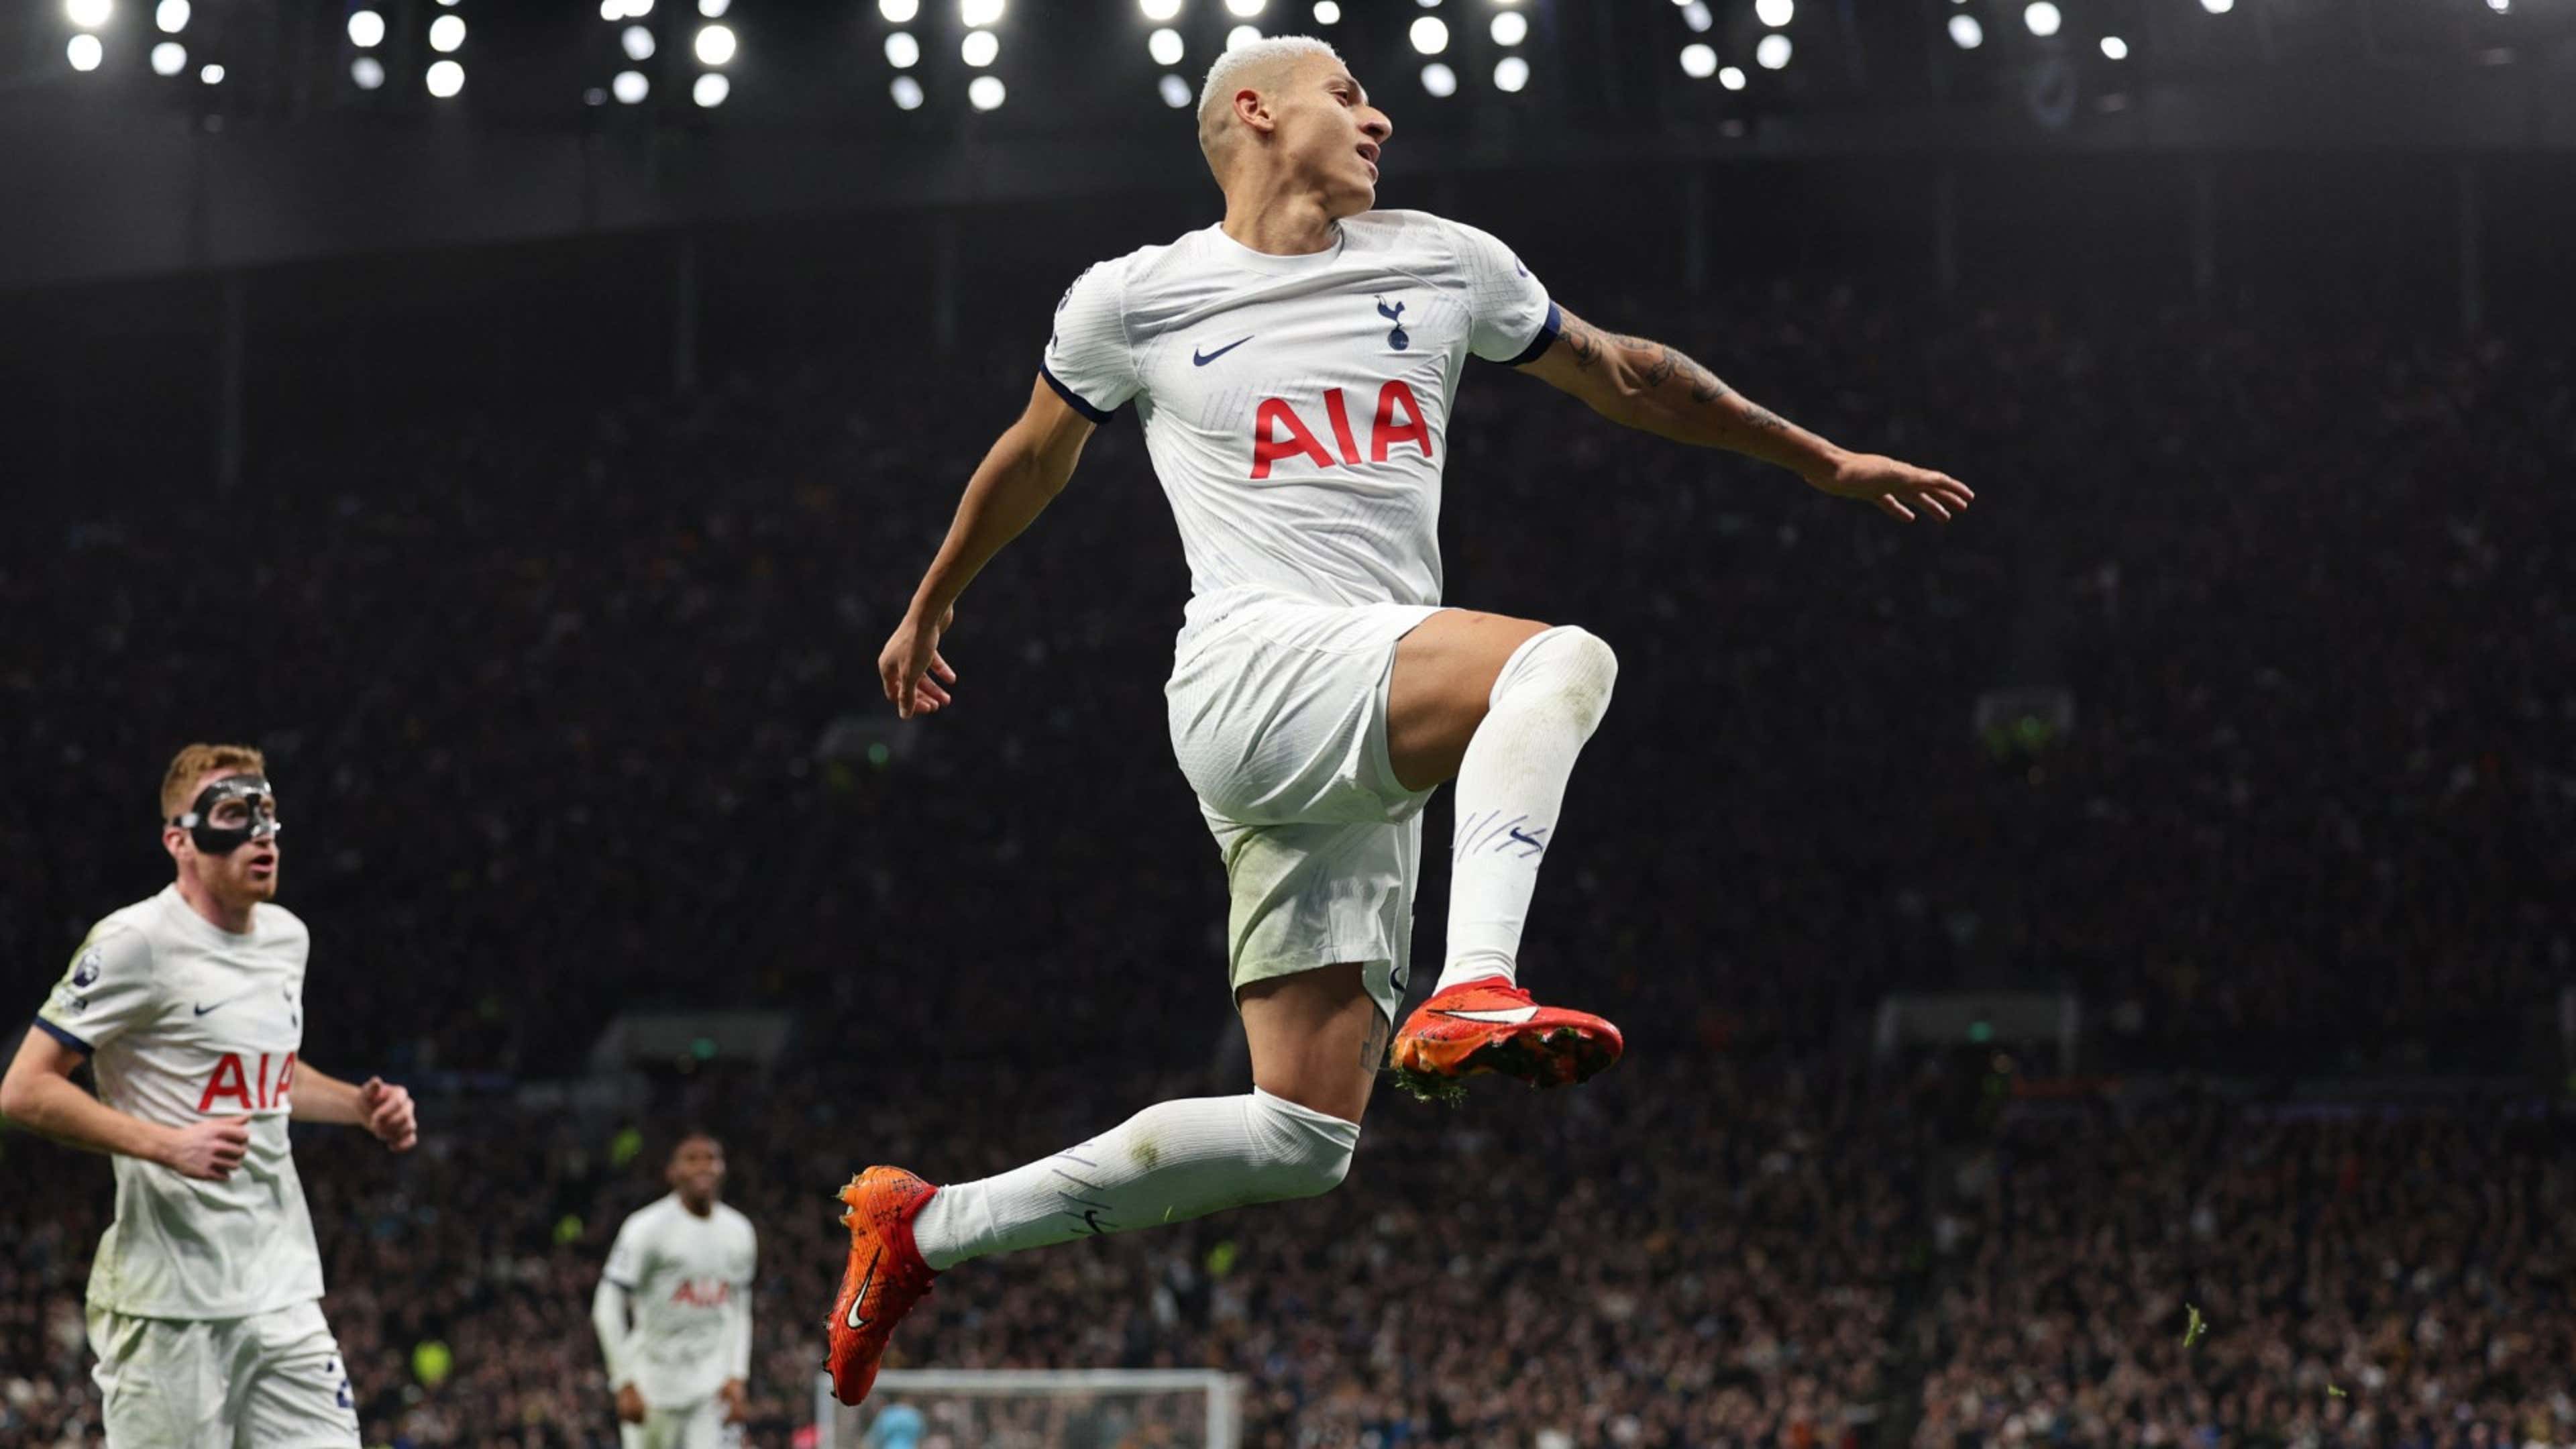 Tottenham powers to a 4-1 win over tired Newcastle. Richarlison